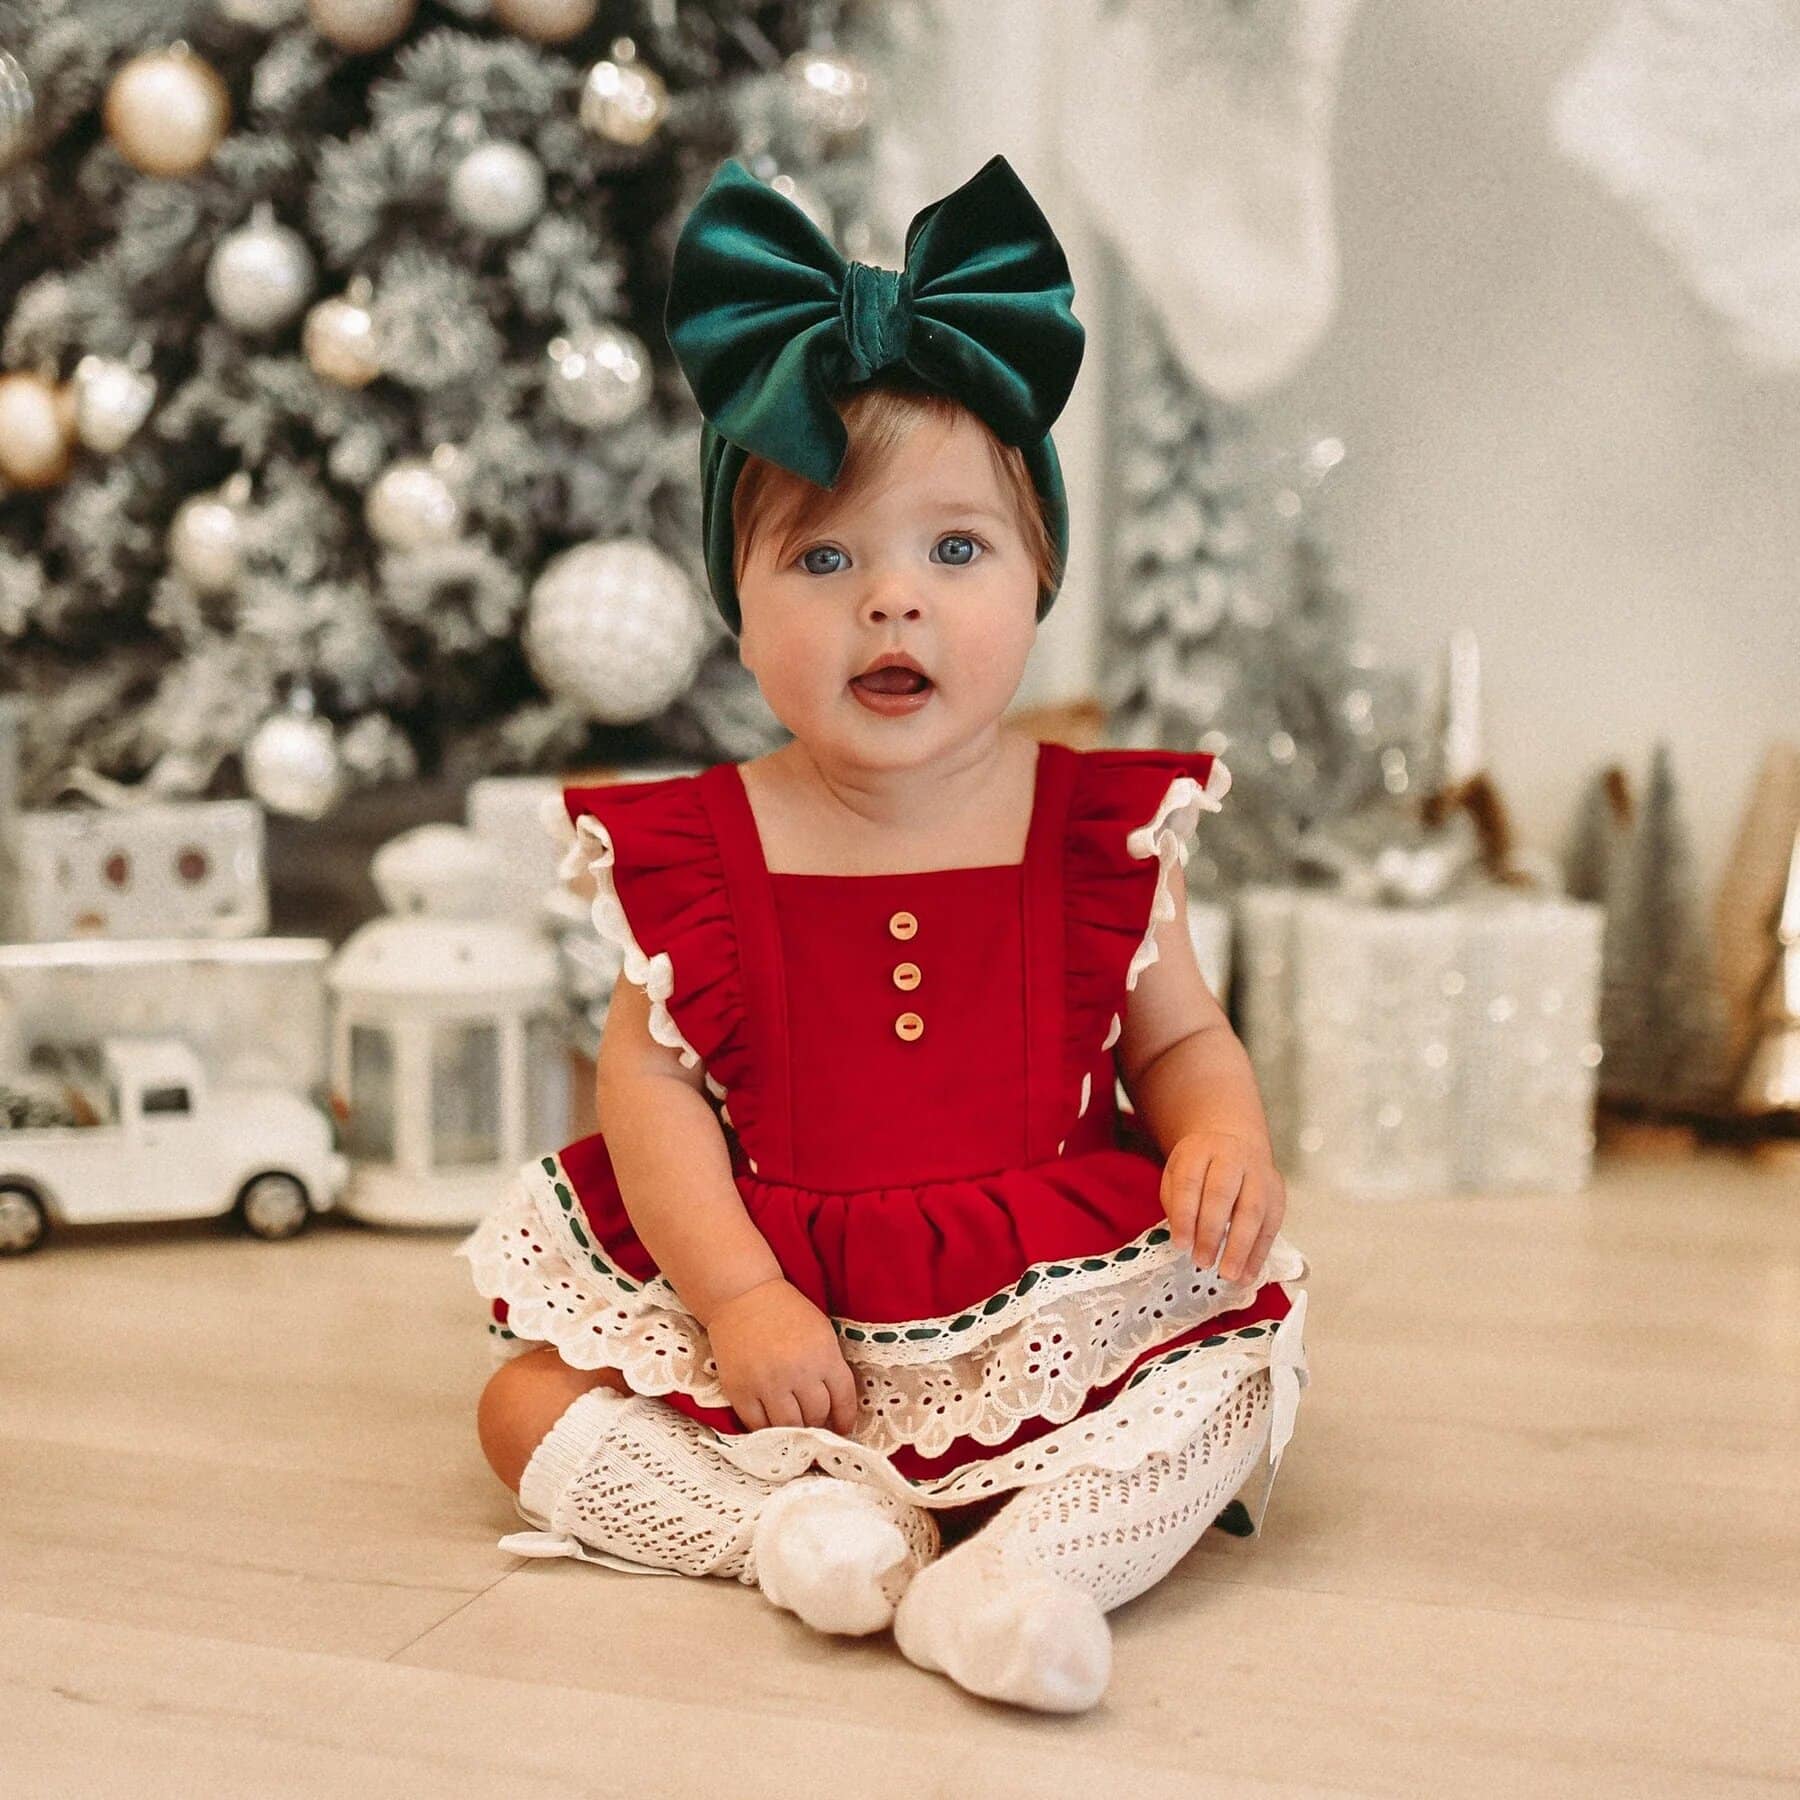 25 Baby Girl Christmas Outfits You'll Love - Baby Chick